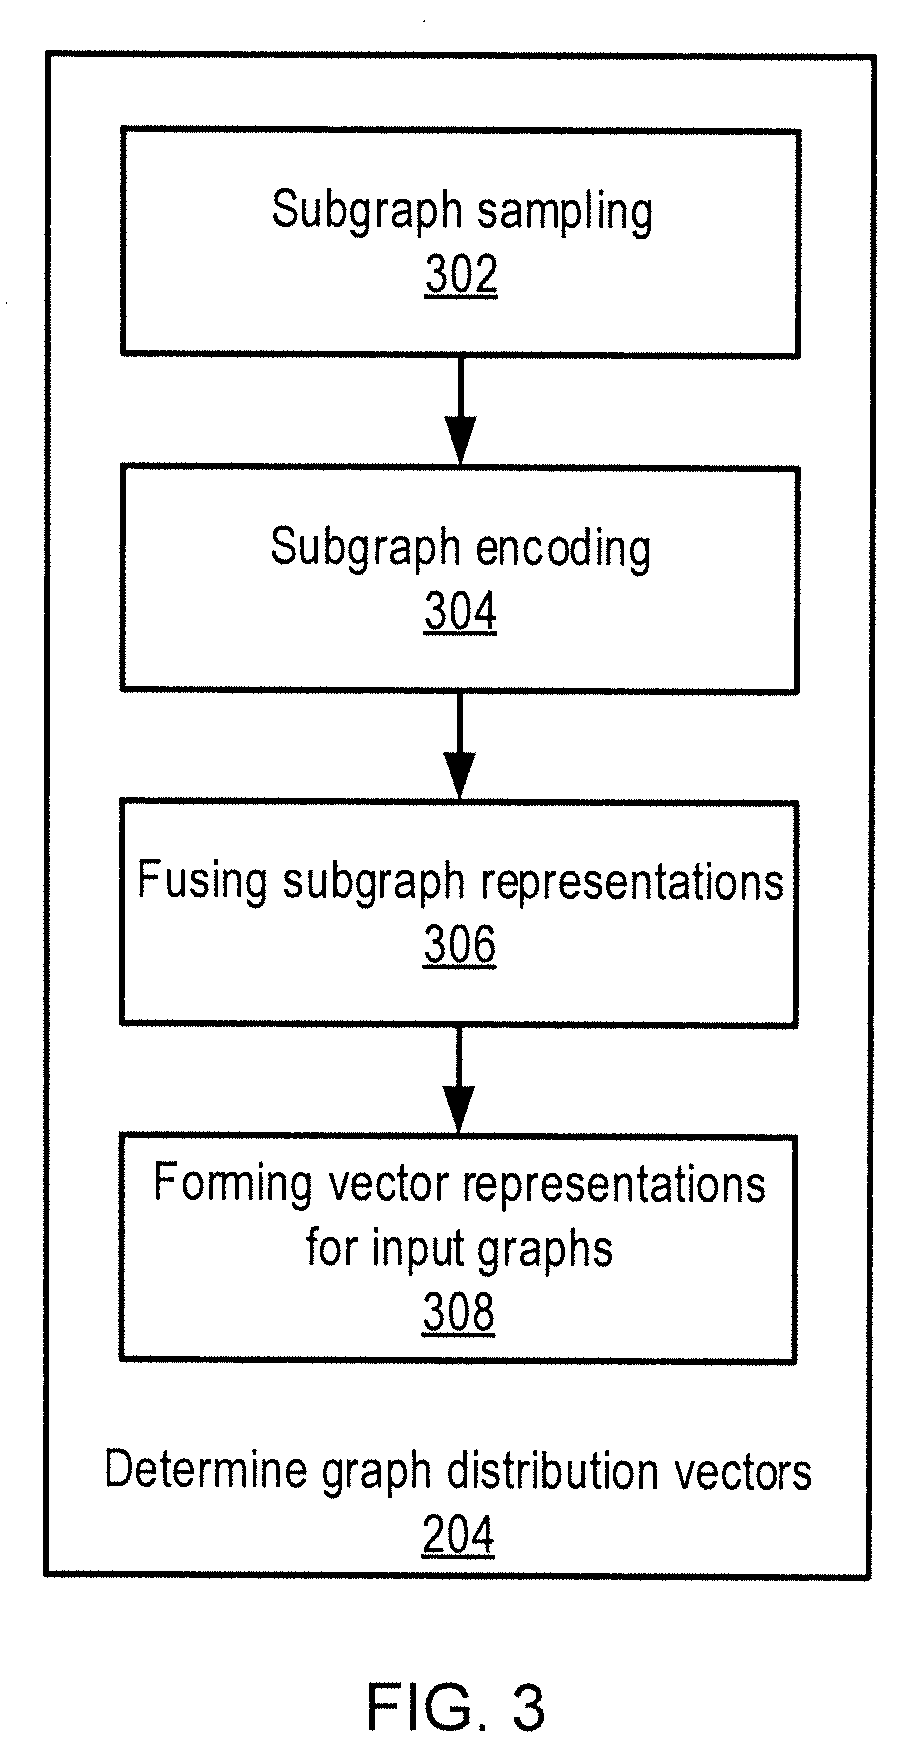 Unsupervised graph similarity learning based on stochastic subgraph sampling